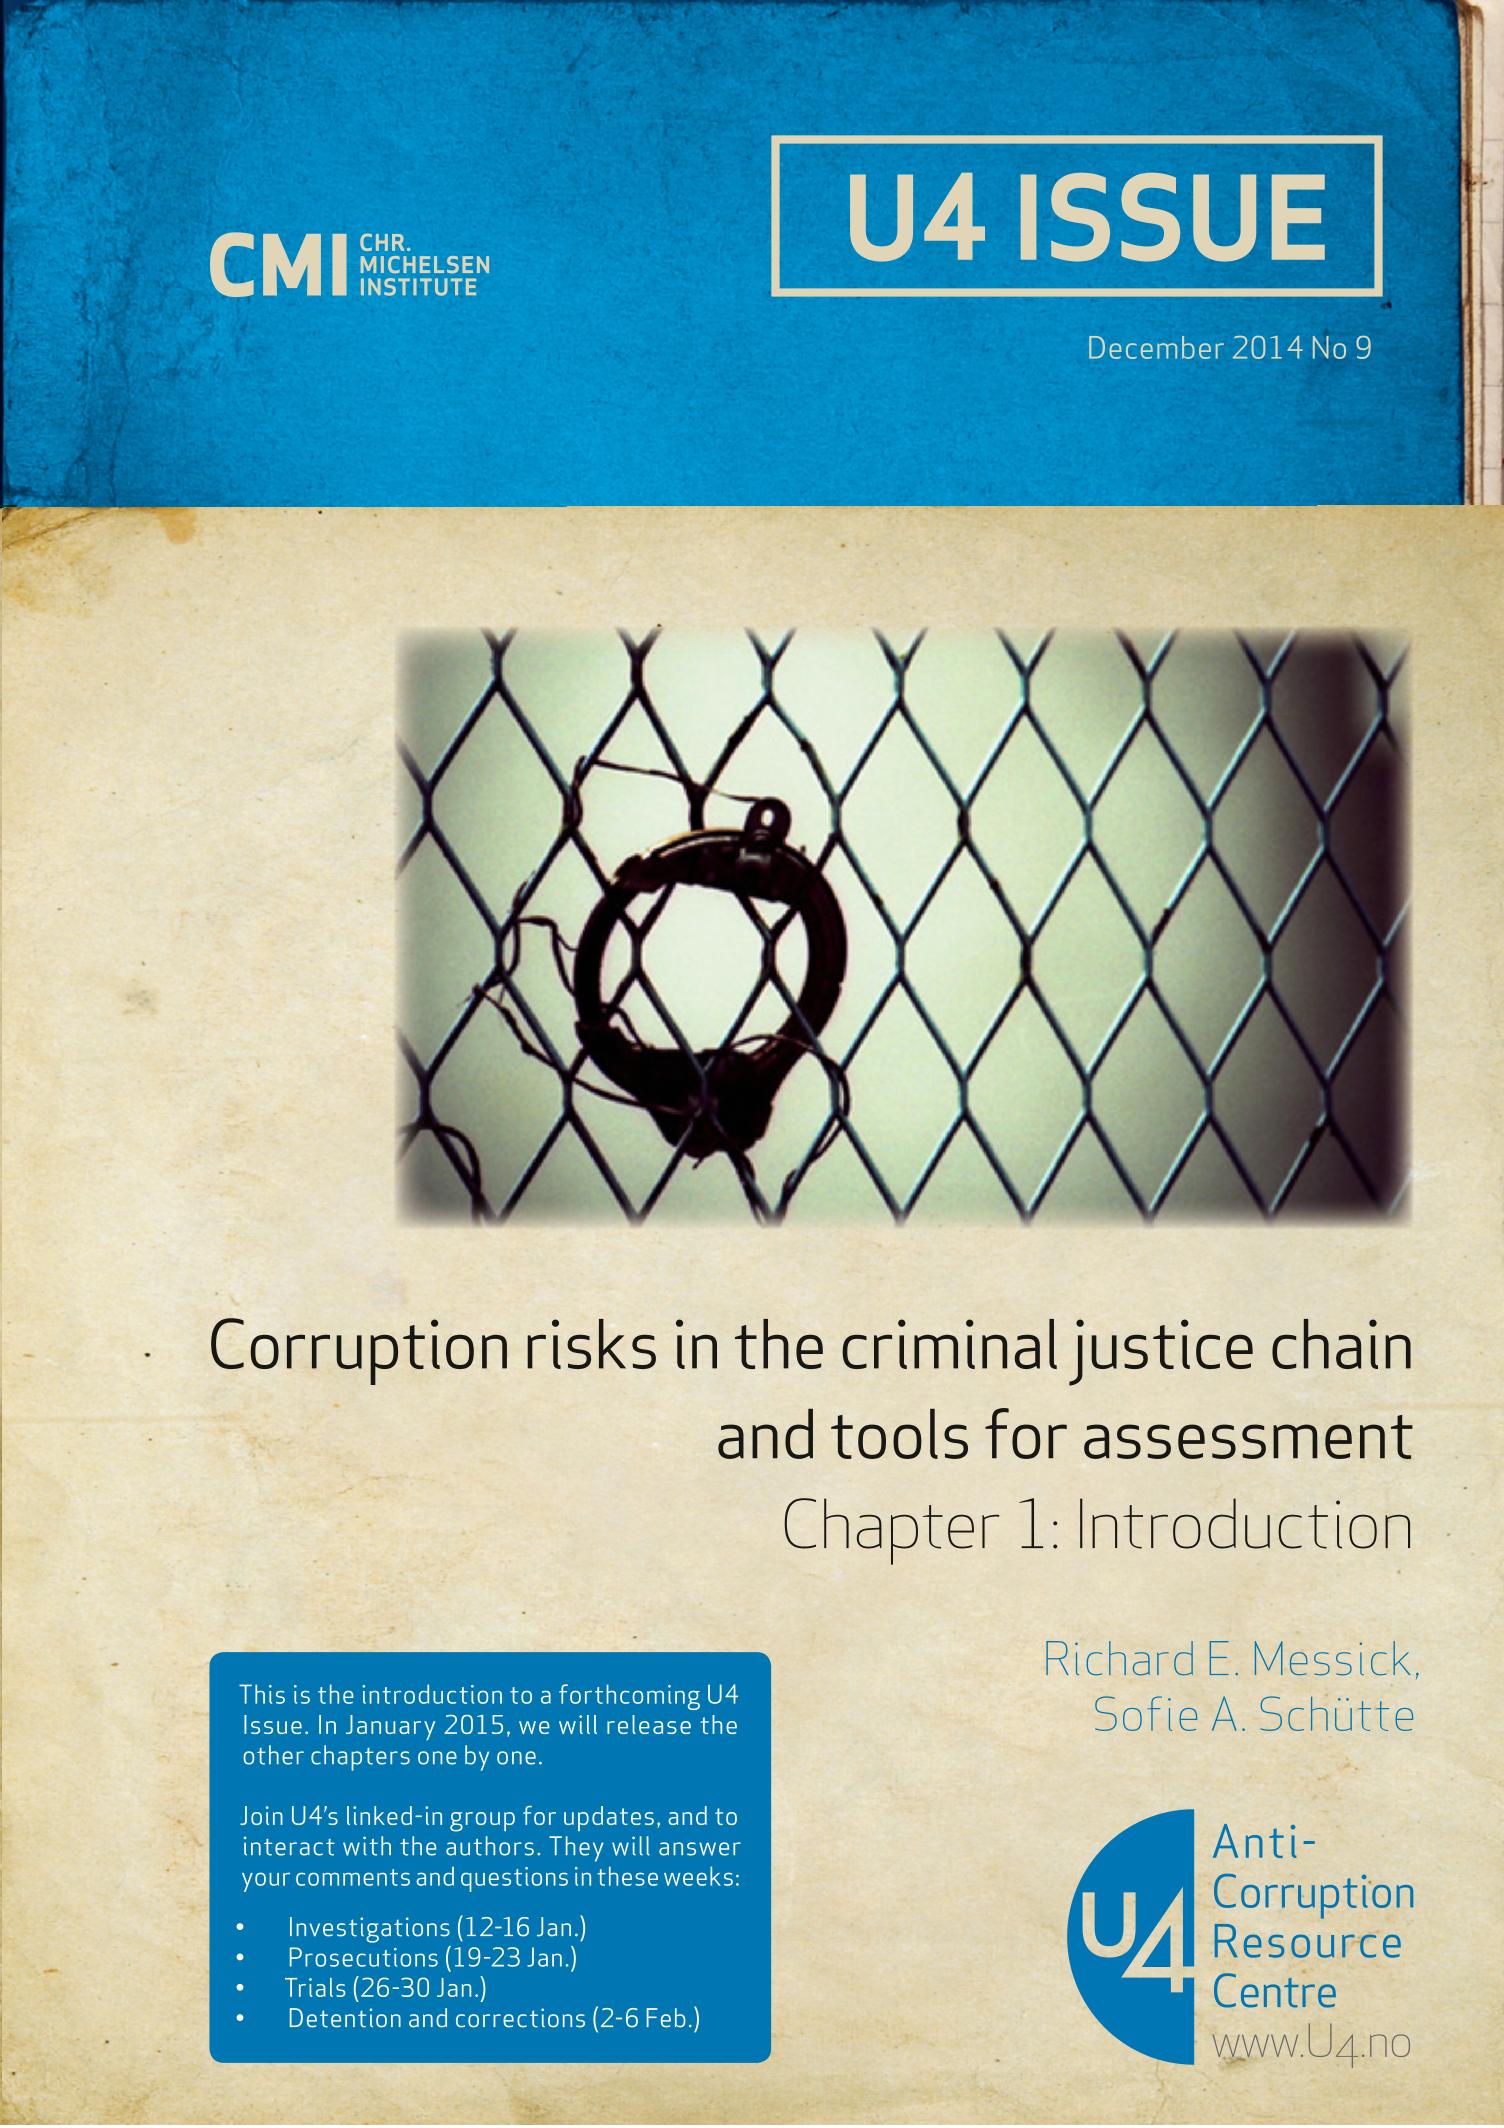 Corruption risks in the criminal justice chain and tools for assessment. Chapter 1: Introduction